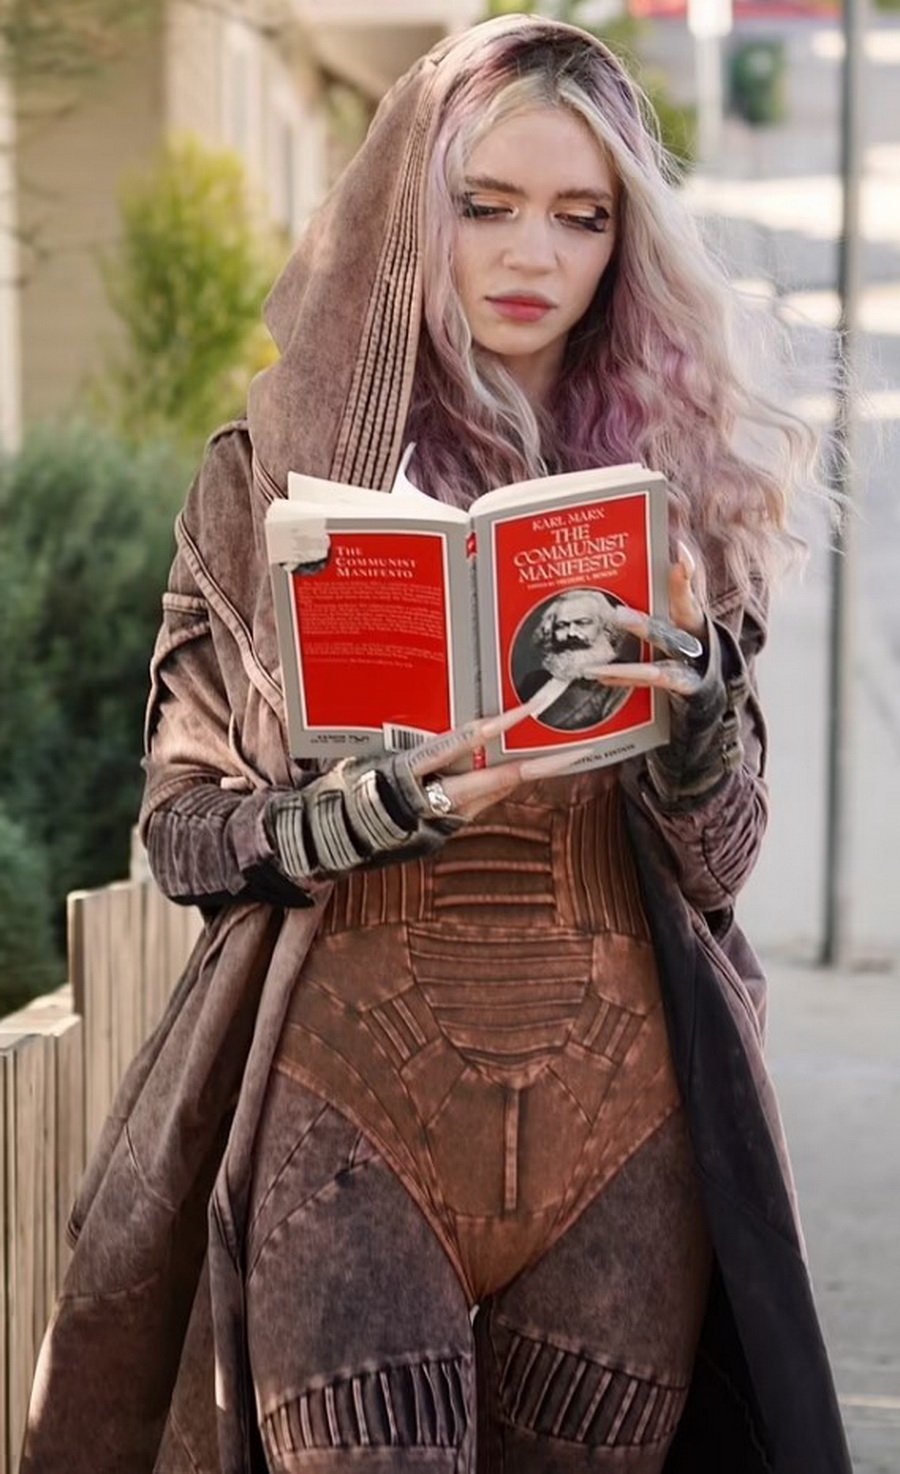 Grimes was photographed walking through Los Angeles for the first time since breaking up with Elon Musk